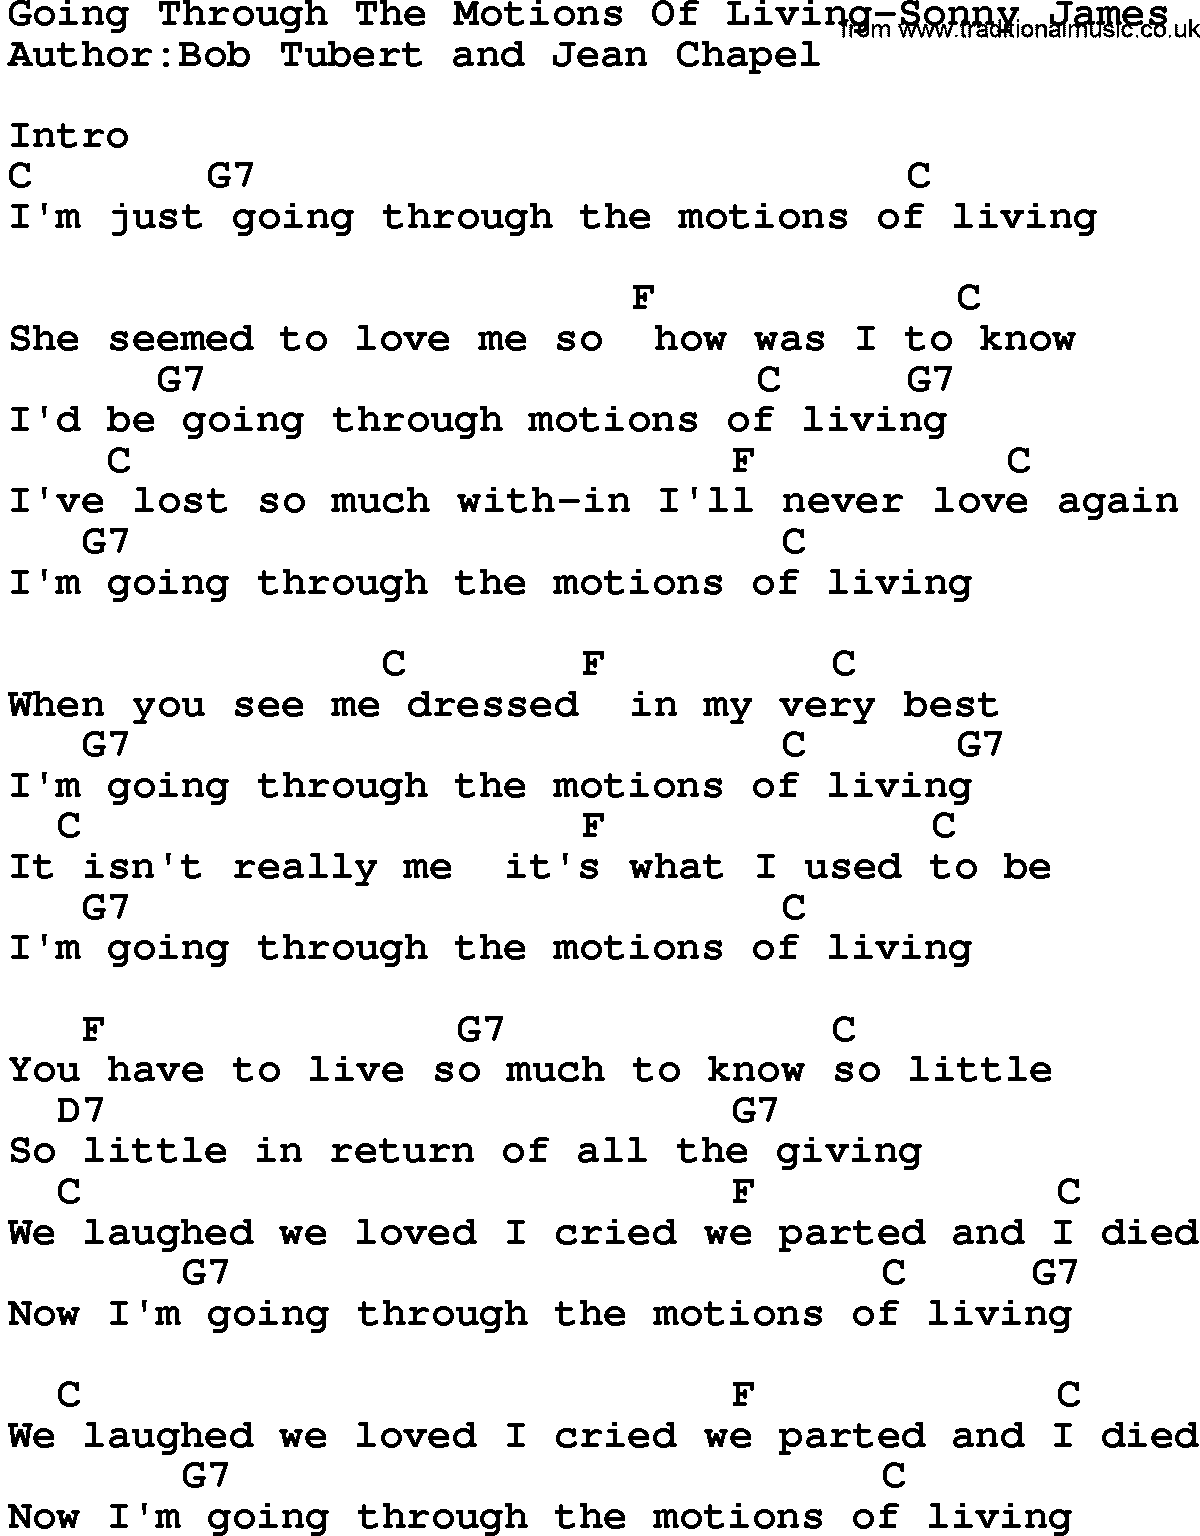 Country music song: Going Through The Motions Of Living-Sonny James lyrics and chords